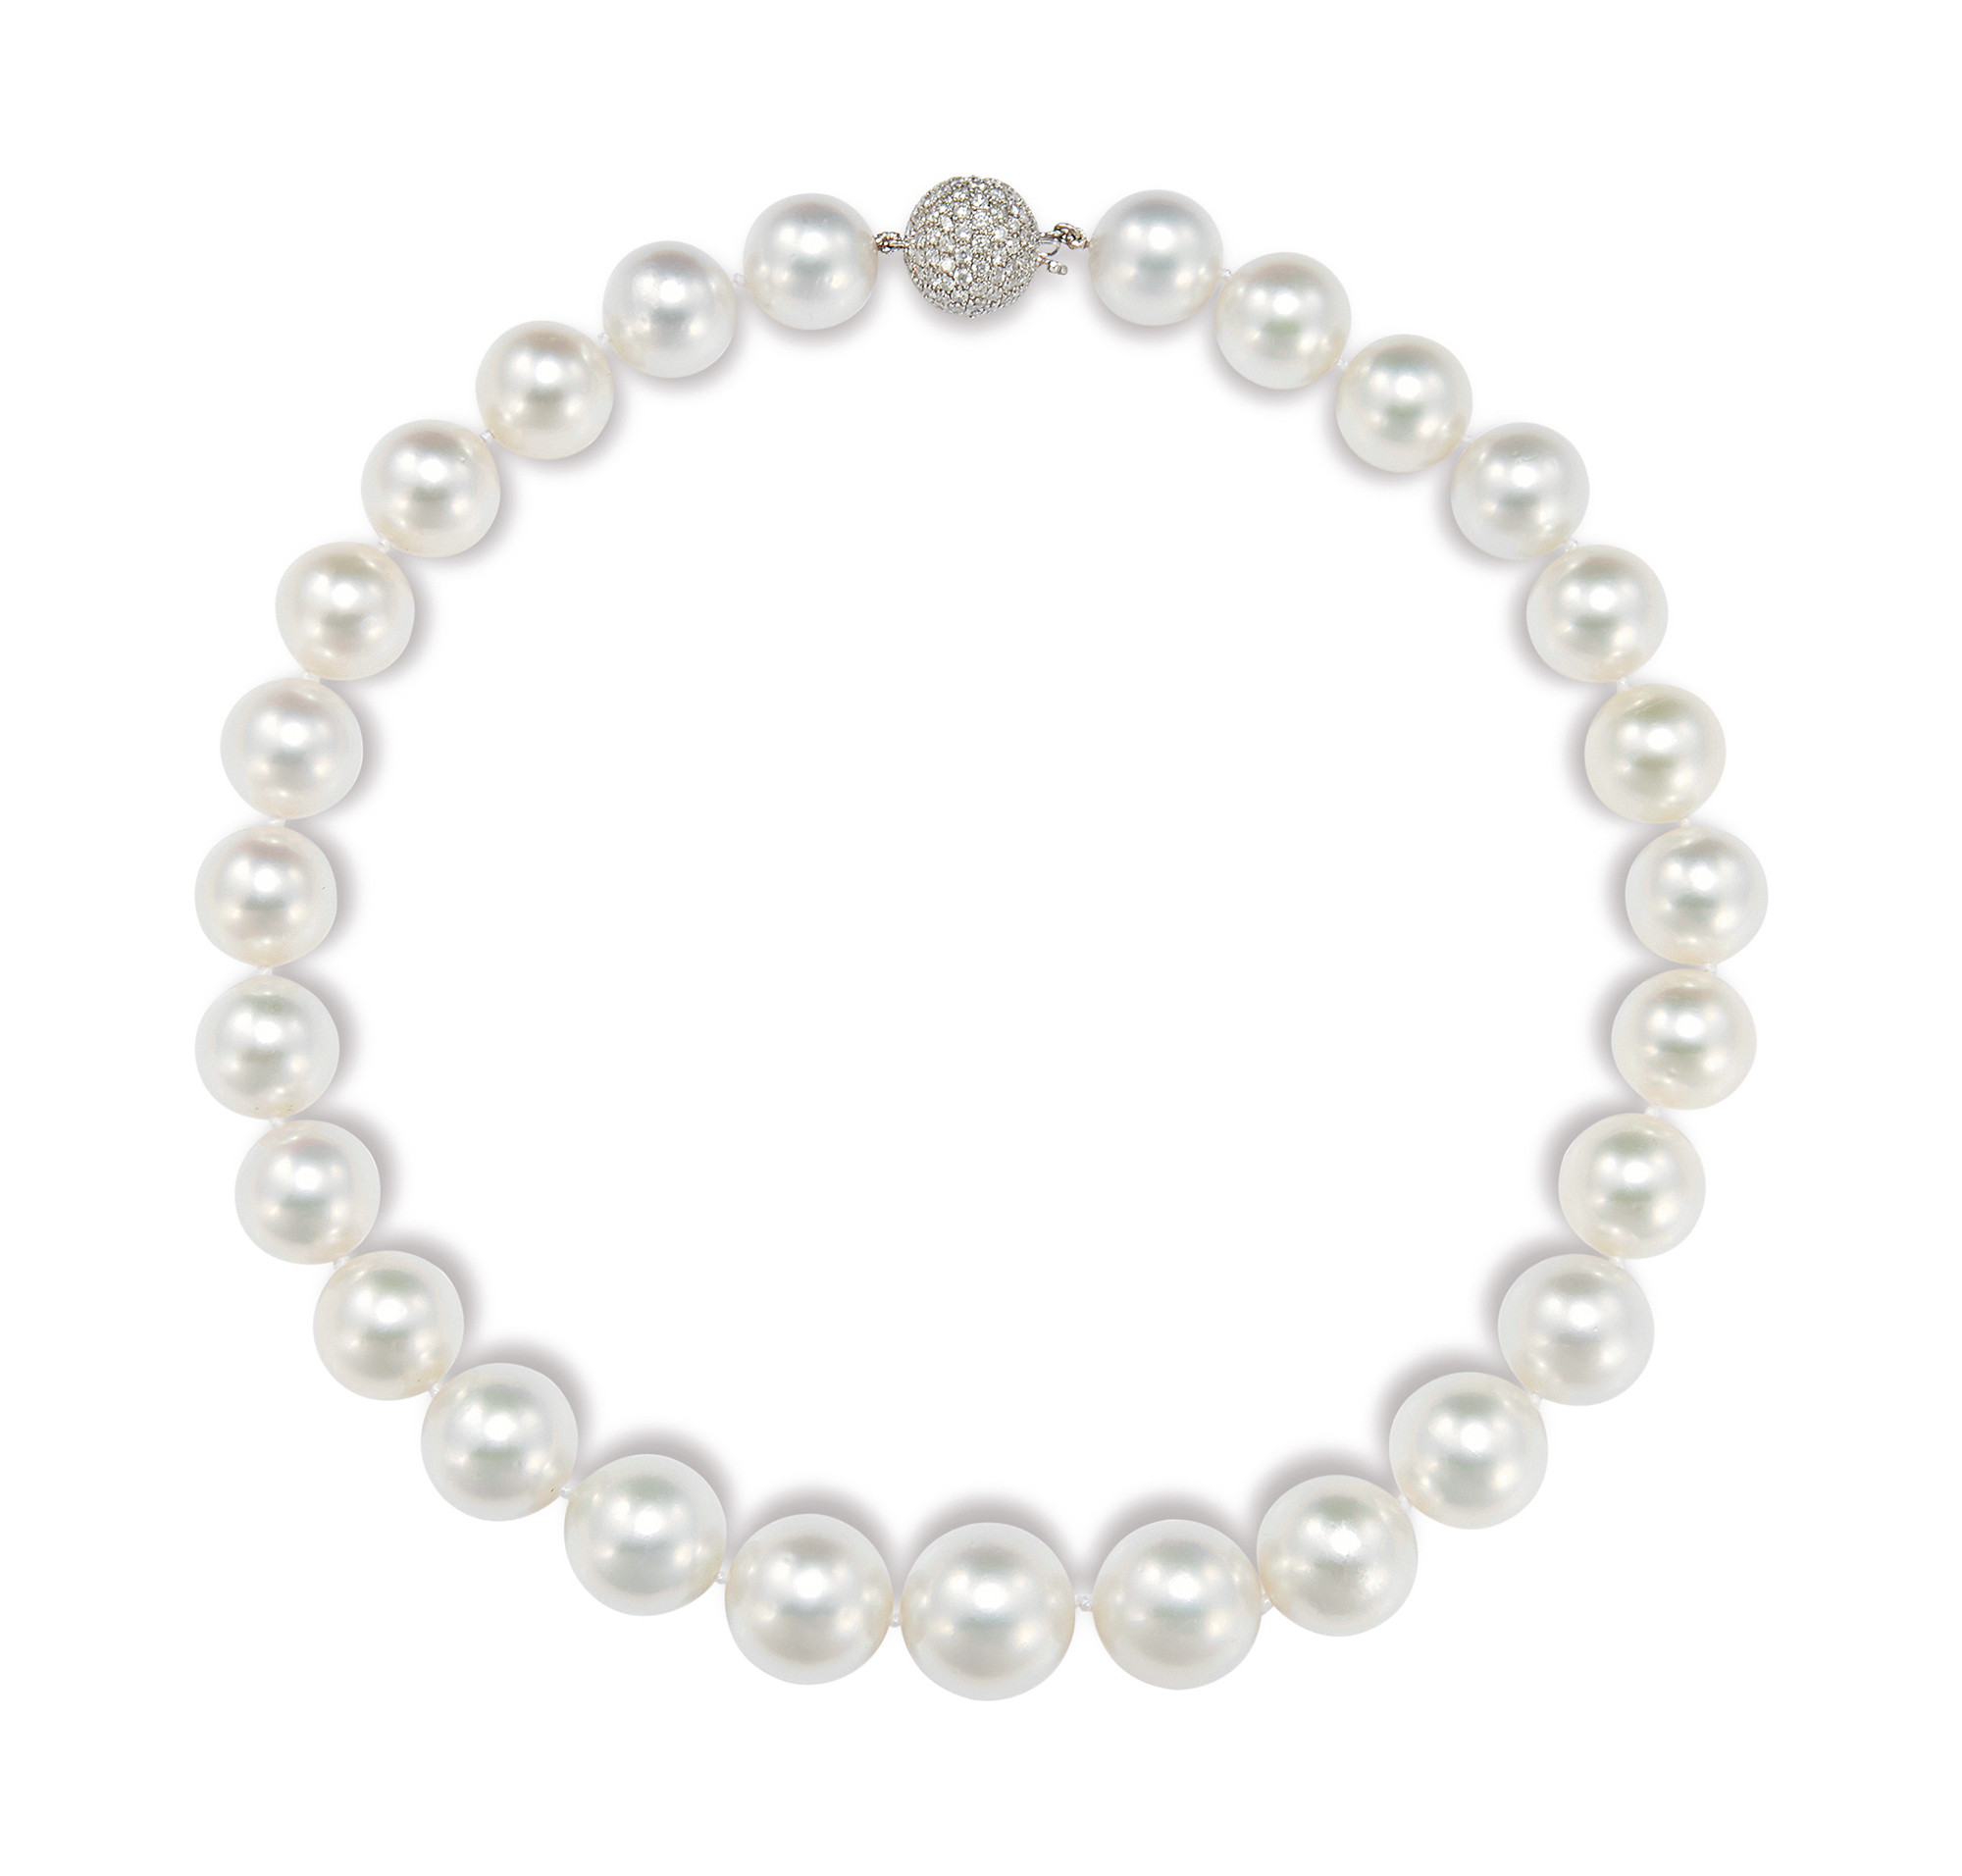 A SOUTH SEA WHITE CULTURED PEARL NECKLACE SET WITH 18K WHITE GOLD AND DIAMOND CLASP， WITH NO INDICATIONS OF TREATMENT